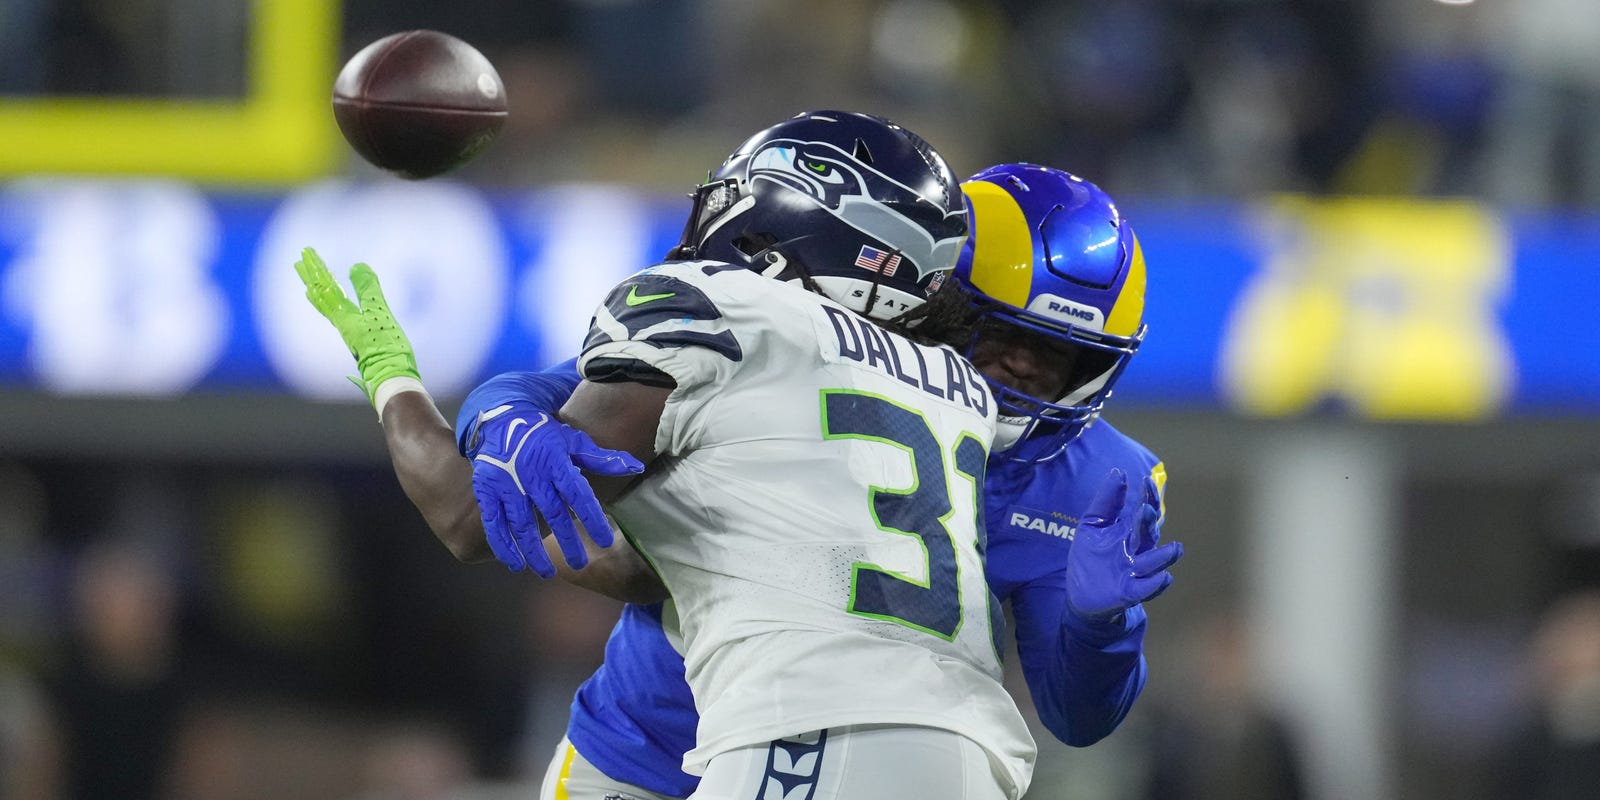 Watch: Referees miss blatant pass interference in Rams-Seahawks game